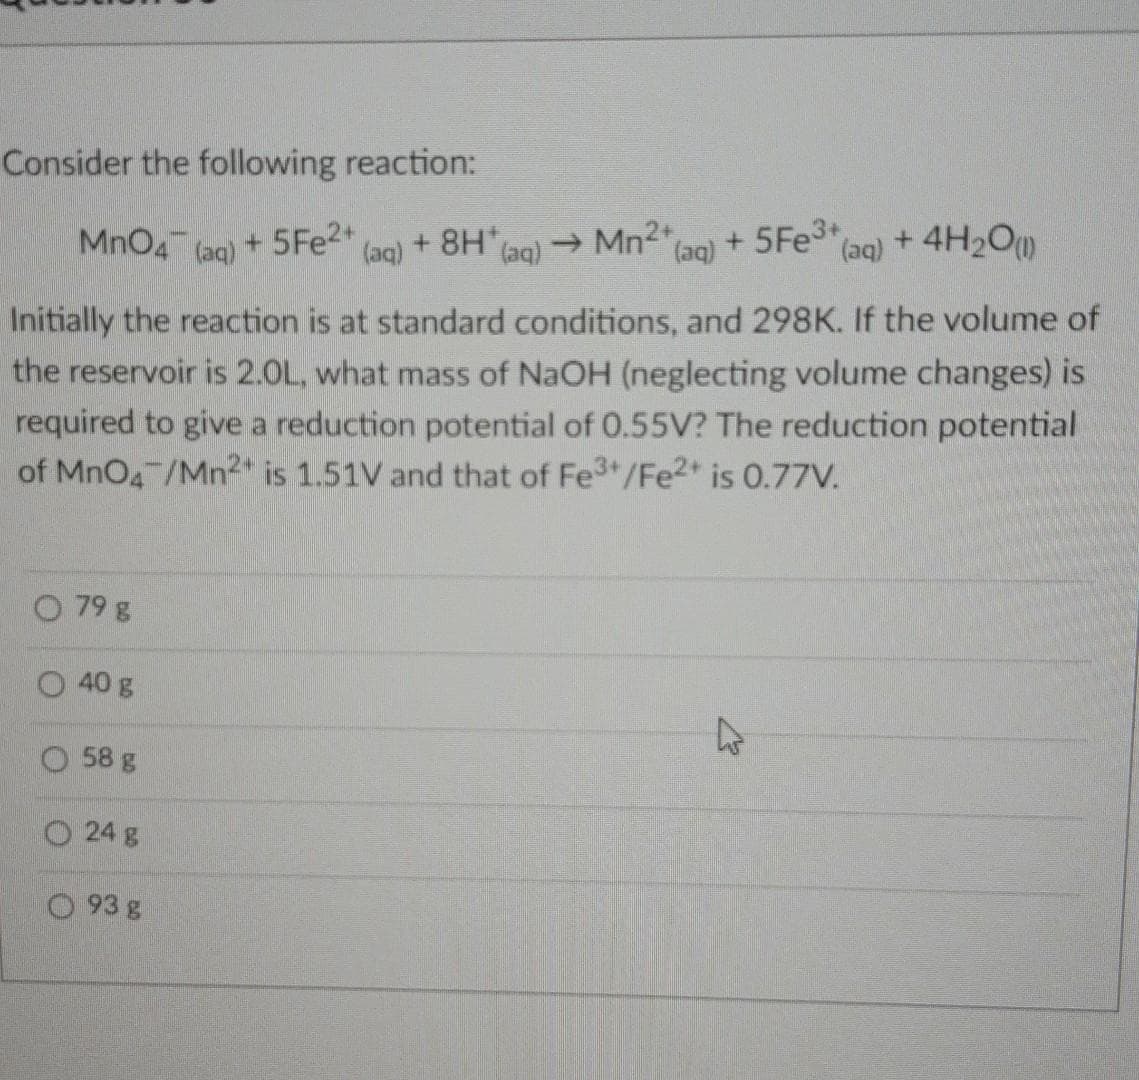 +8H ag) Mn2* (ag) + 5FE3+
Consider the following reaction:
MnO4
(aq)
+ 5FE2+
(aq) + 4H2O
(aq)
Initially the reaction is at standard conditions, and 298K. If the volume of
the reservoir is 2.0L, what mass of NaOH (neglecting volume changes) is
required to give a reduction potential of 0.55V? The reduction potential
of MnO4 /Mn2" is 1.51V and that of Fe3+/Fe2+ is 0.77V.
O 79 g
40 g
O 58 g
O 24 g
O 93 g
